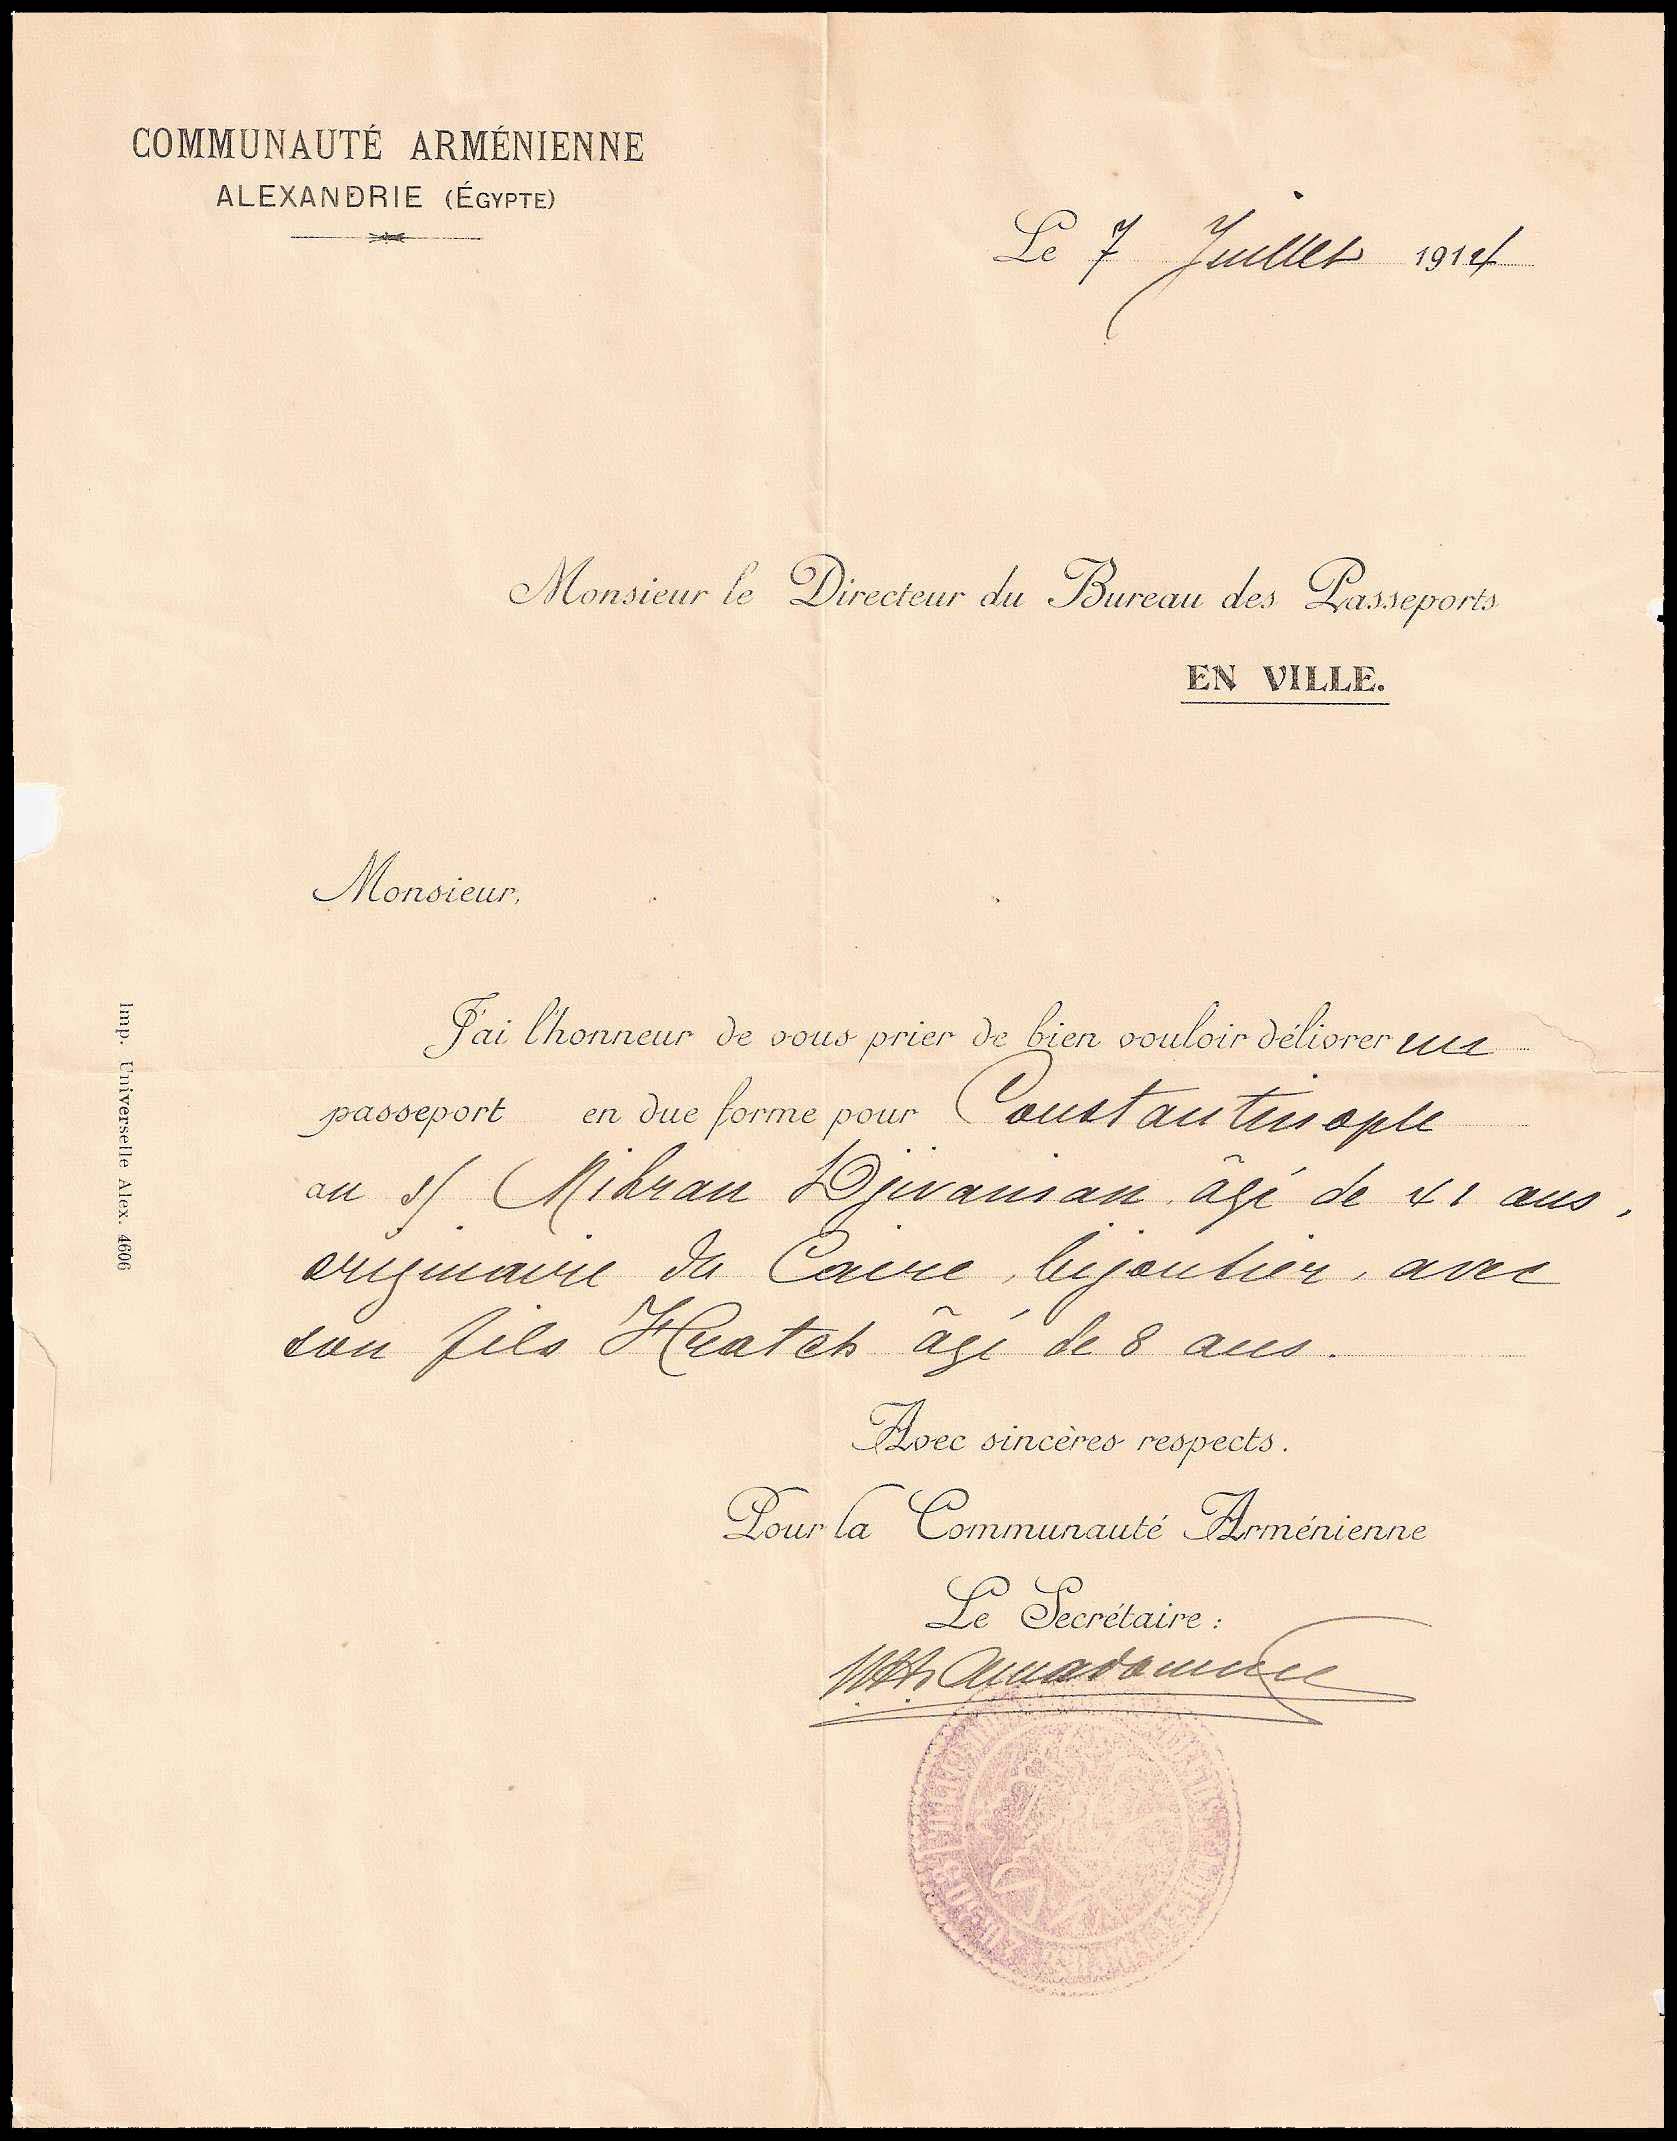 7.7.1914 Armenian Community in Alexandria, Egypt - Application for a pass to Constantinople